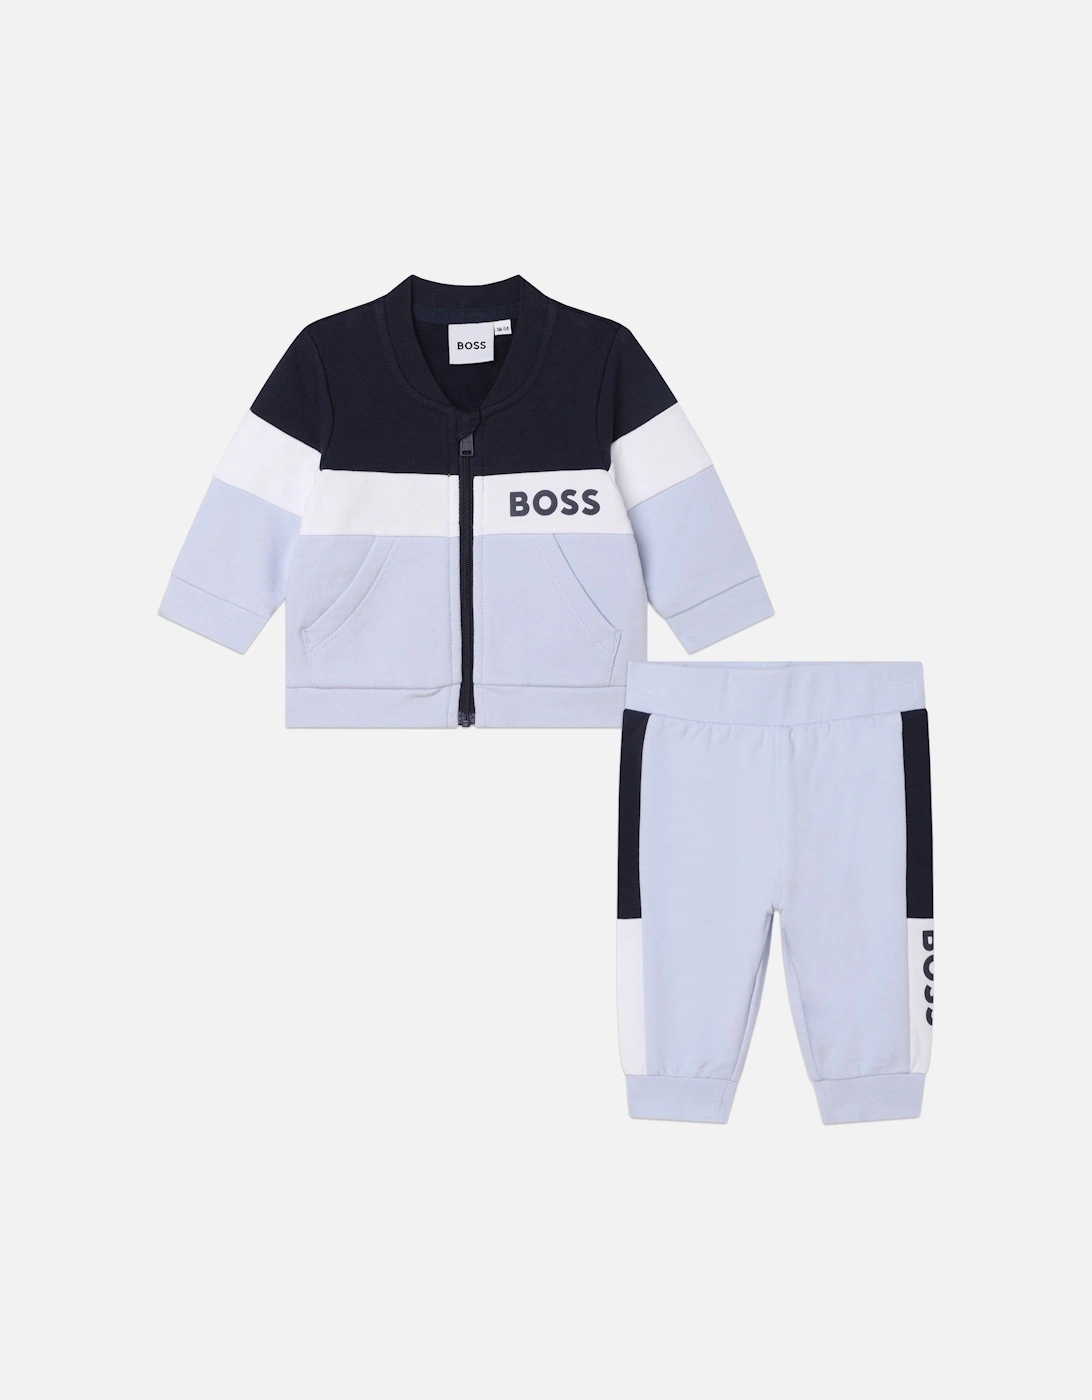 Boss Baby Boys Tracksuit Zip Top and Pants Set in Pale Blue, 9 of 8